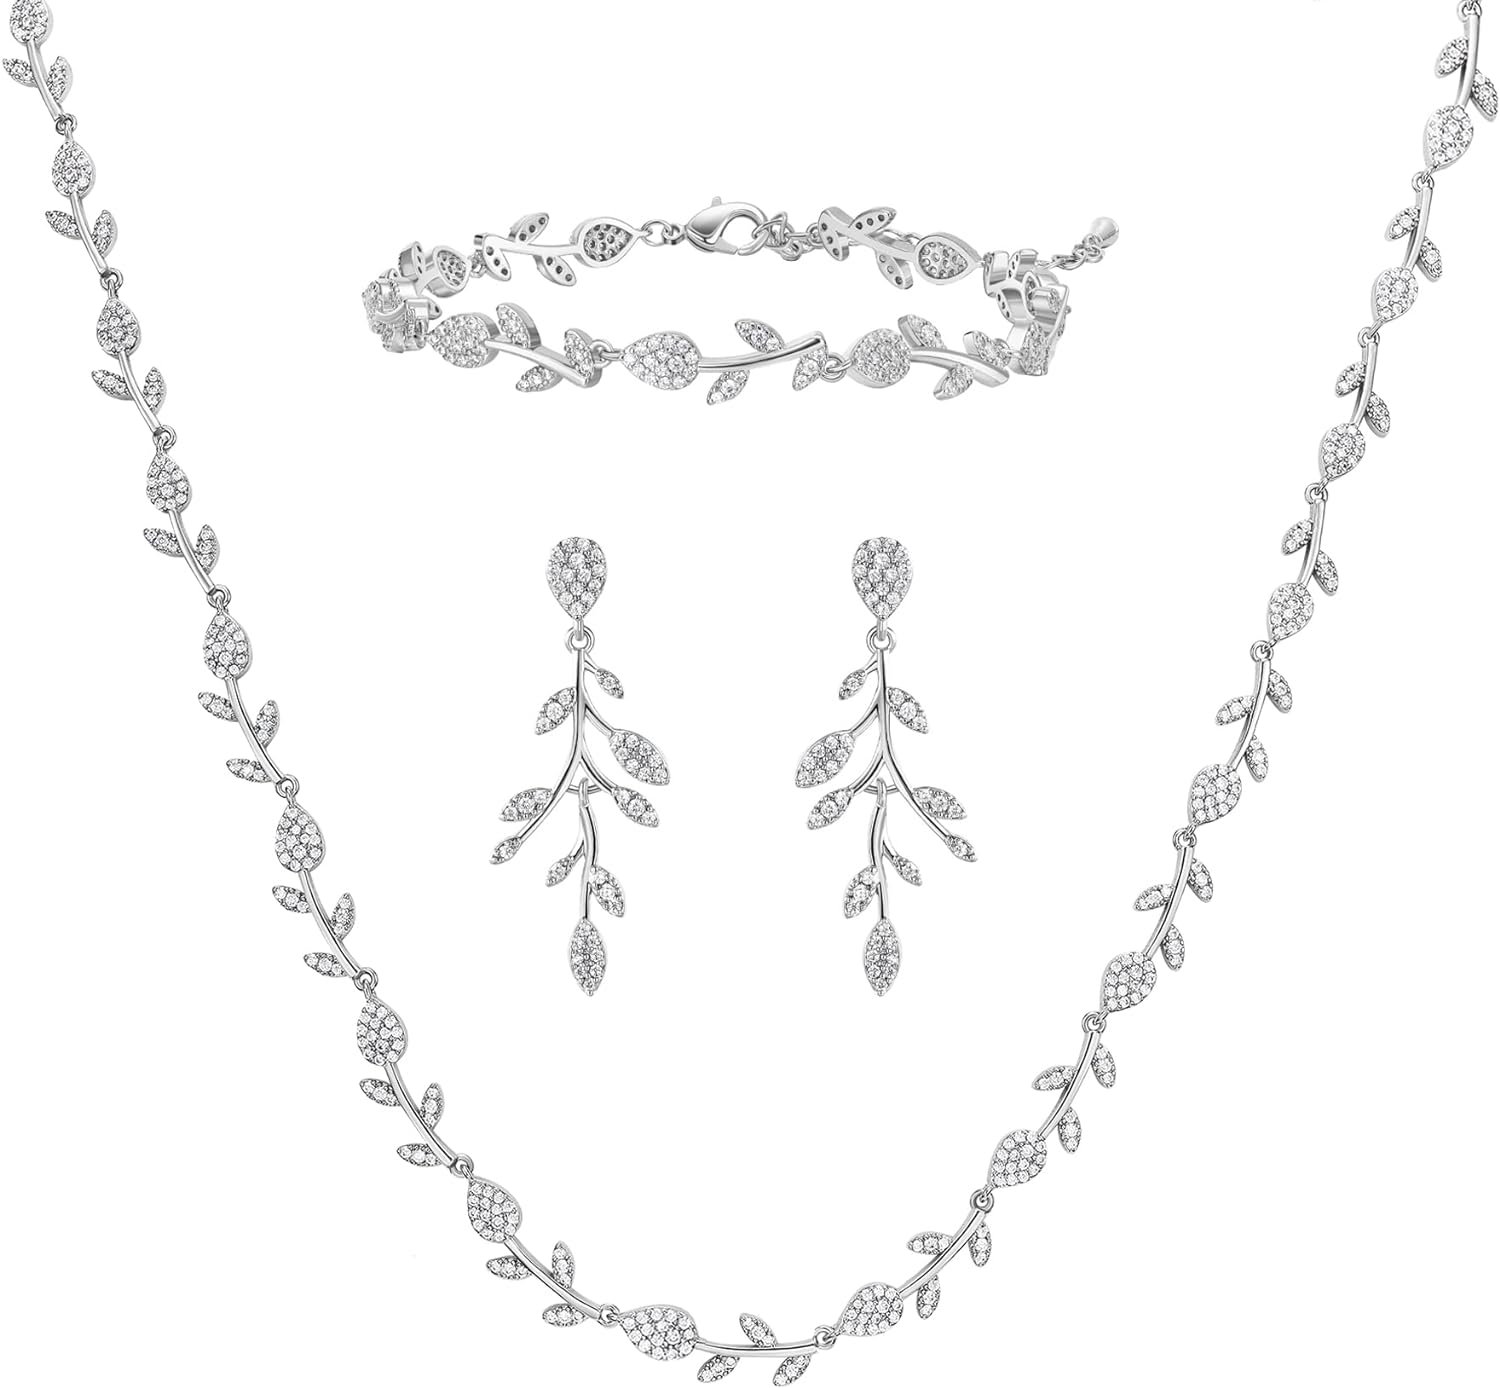 SWEETV Cubic Zirconia Wedding Jewelry Sets for Bride Bridesmaids, Crystal Leaf Vine Bridal Earrings and Necklace Set for Women Jewelry Gifts